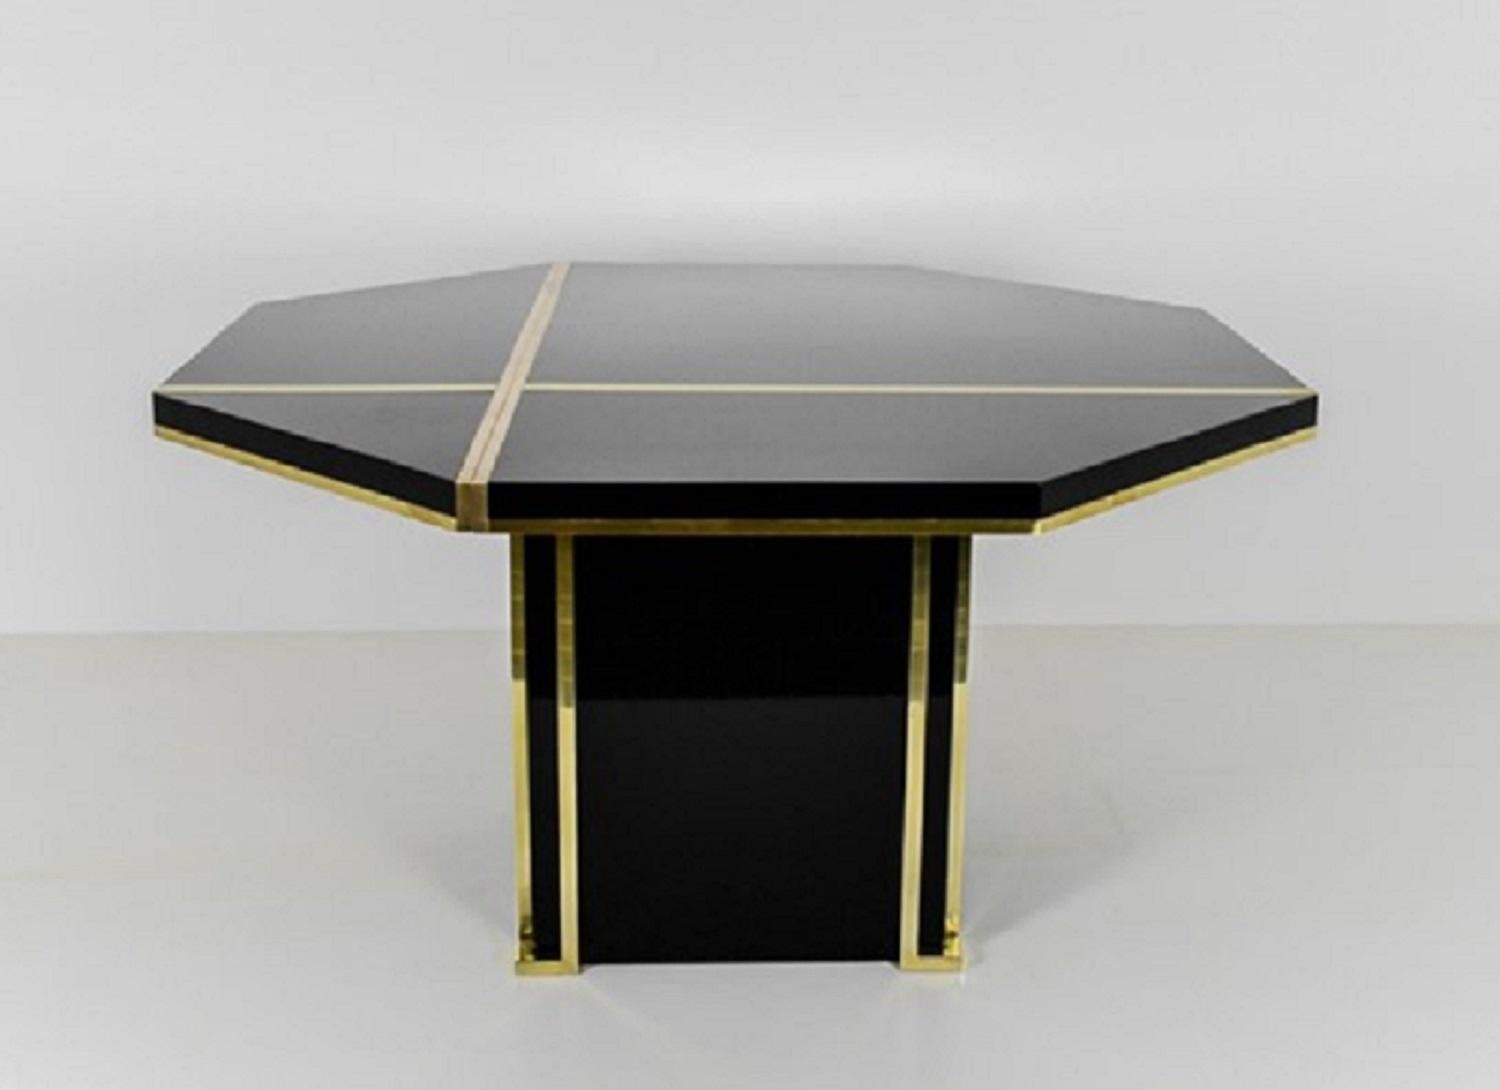 Outstanding Jean Claude Mahey Dining table in black lacquered wood and brass by Jean Claude Mahey for Roche Bobois Design
Dining table lacquered black and brass by Jean Claude Mahey, made by Roche Bobois in the 70s.
It is octagonal shaped, with